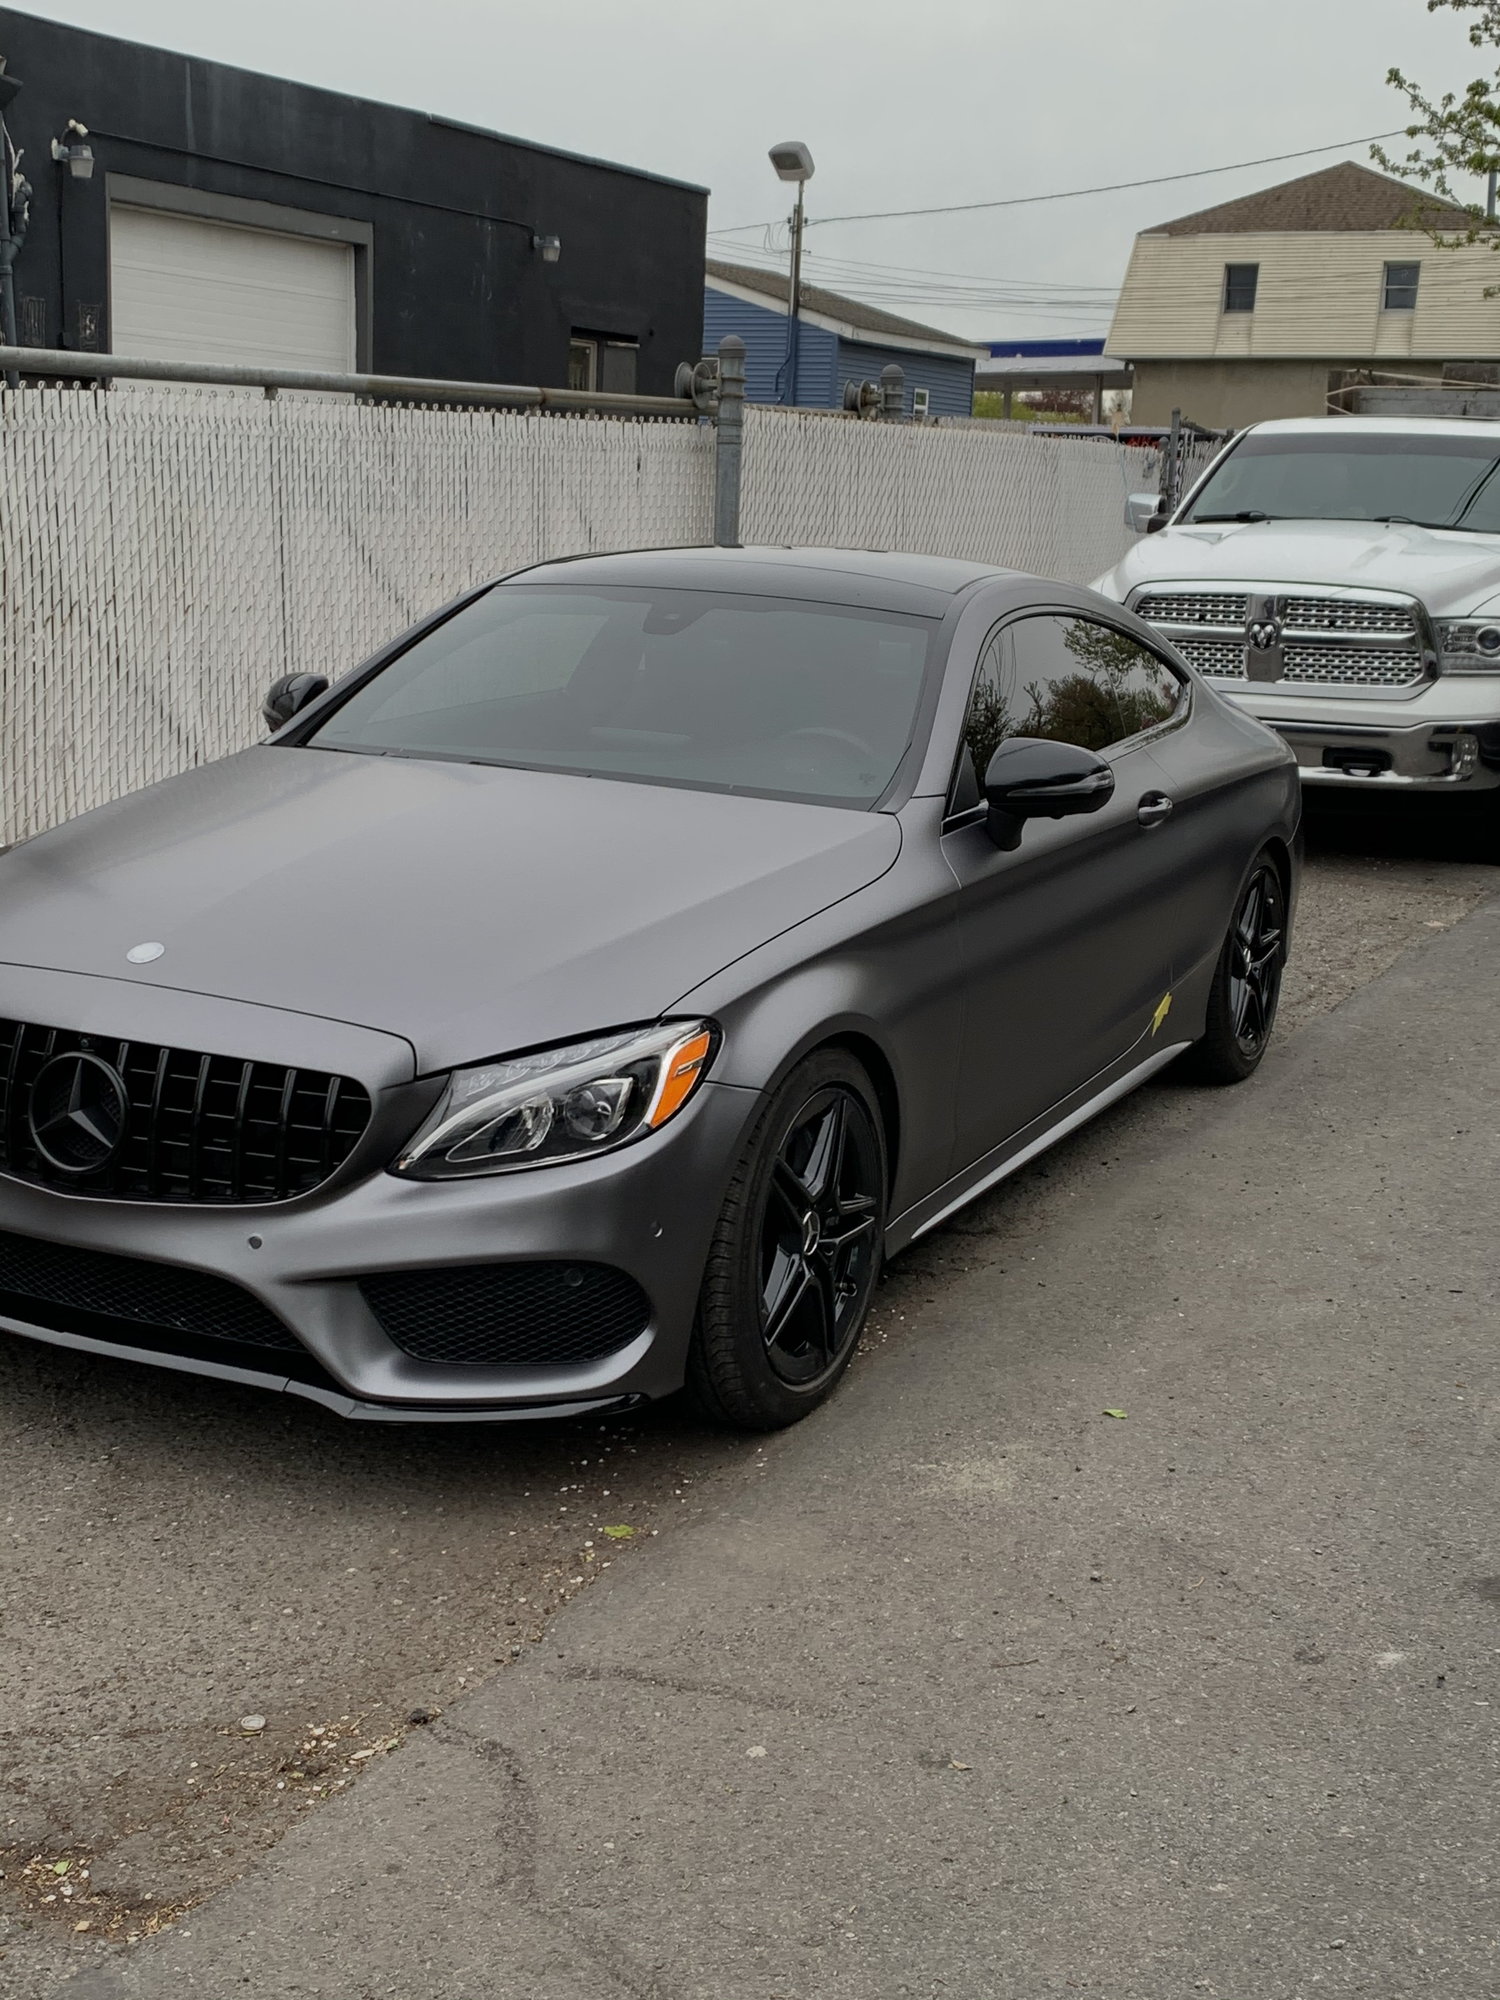 2017 Mercedes-Benz C43 AMG - 2017 C43 AMG, Wrapped in Satin Dark Gray, and the perfect mods! - Used - VIN WDDWJ6EB3HF464130 - 73,000 Miles - 6 cyl - AWD - Automatic - Coupe - Other - Bedford, NY 10506, United States